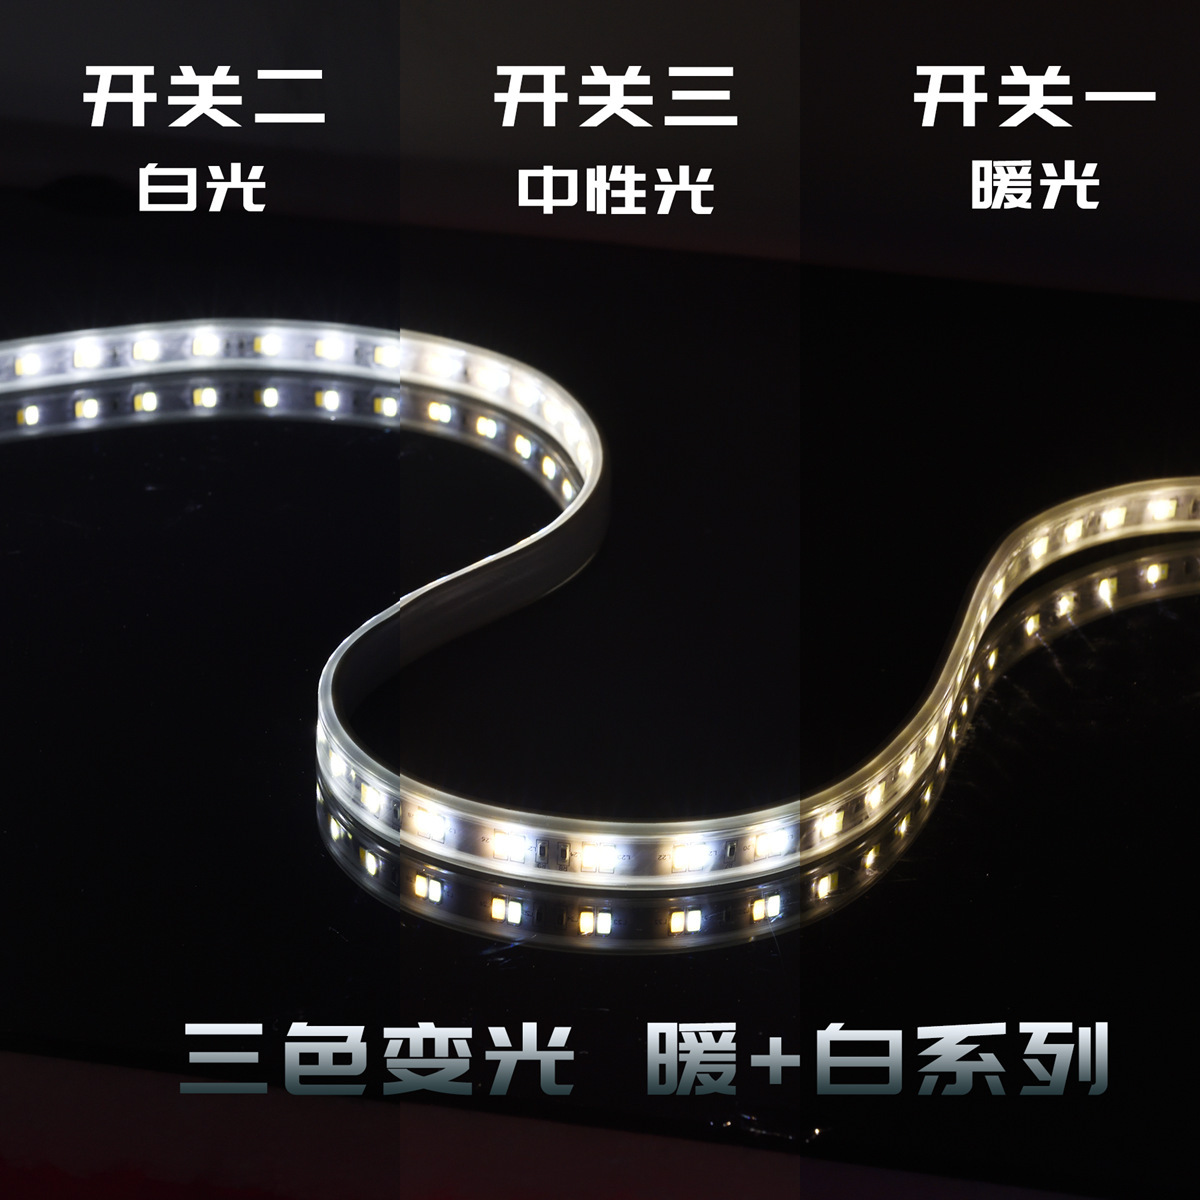 LED Light Strip 5730 High Voltage SMD 220V Ceiling Violet 120 Beads Variable Light with Three Colors Ambience Light Strip